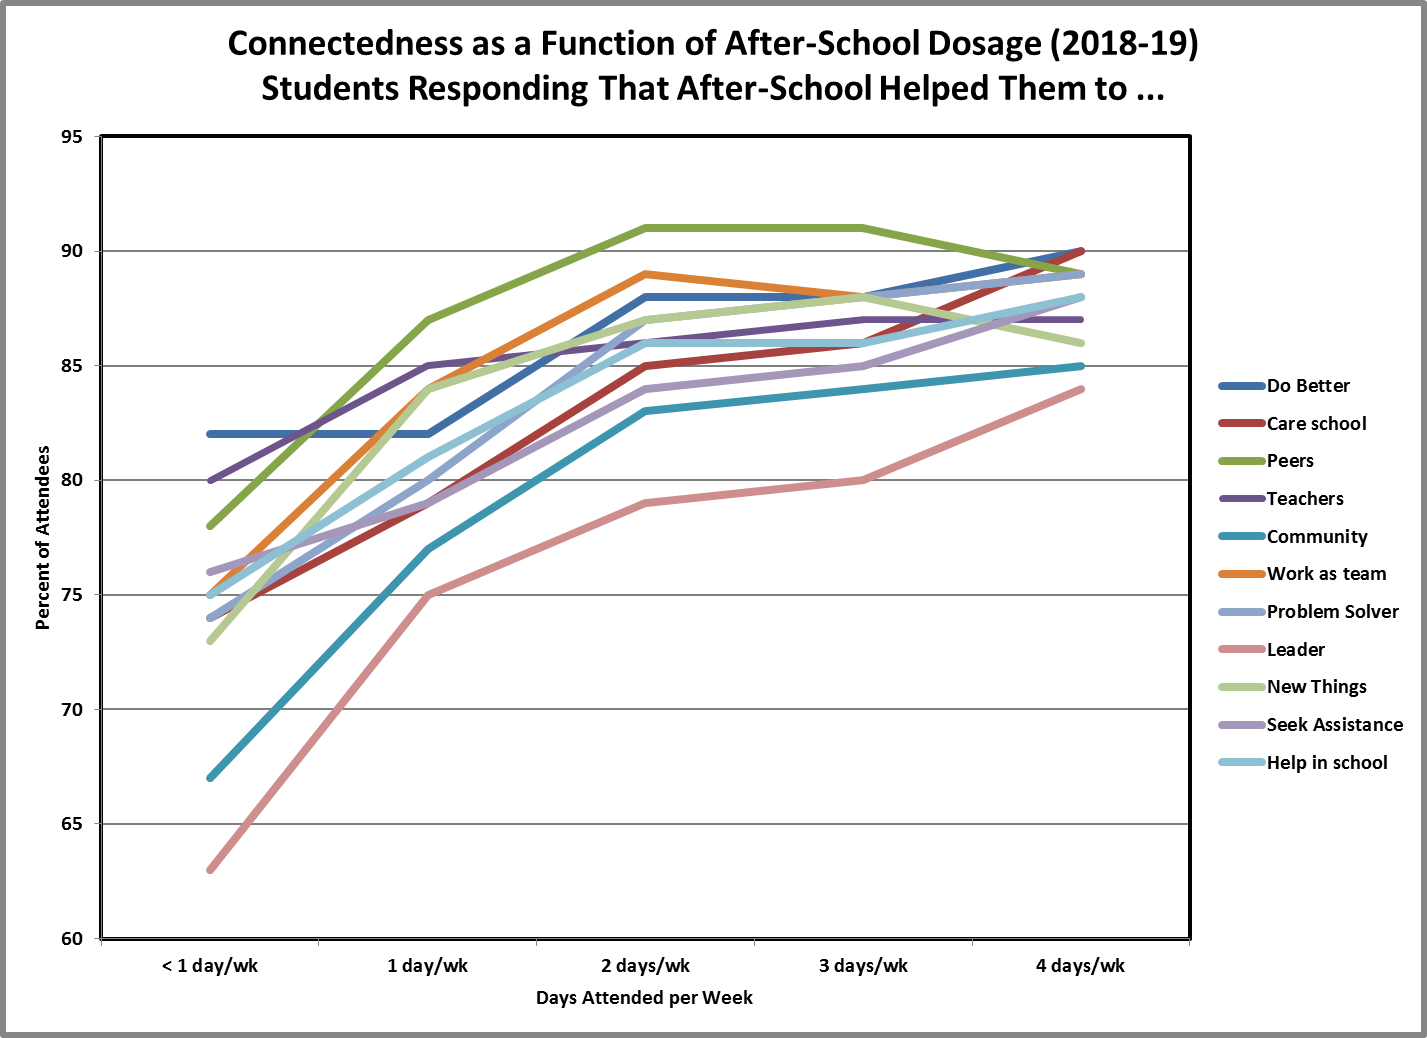 Chart depicting student connectedness as a function of after-school dosage